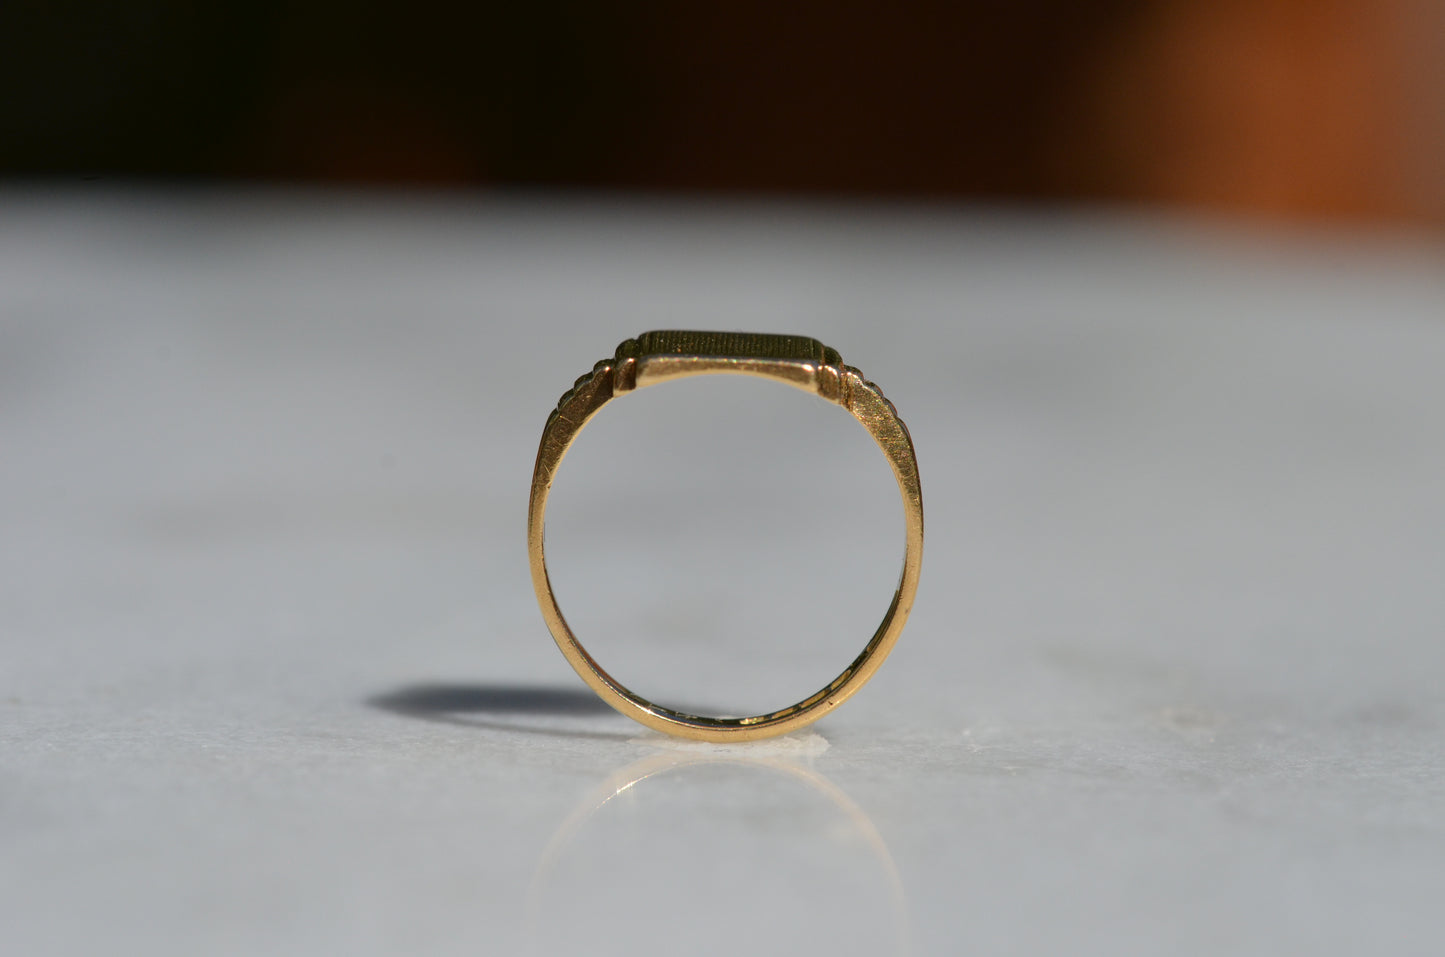 The ring is positioned upright, looking through the finger hole, to show the very low rise of the flat top and the thickness of the notched shoulders.